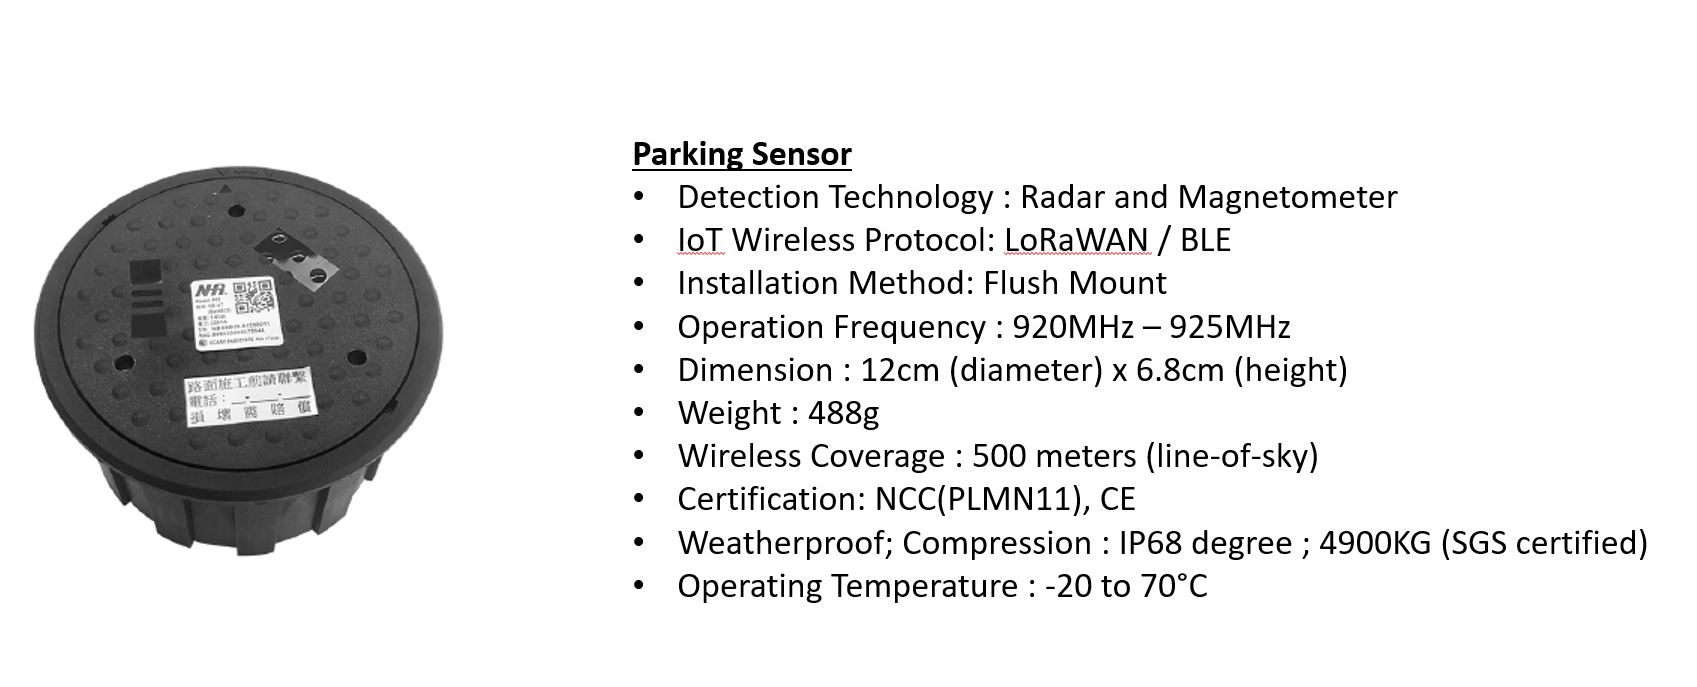 Parking Sensor 
Detection Technology : Radar and Magnetometer
IoT Wireless Protocol: LoRaWAN / BLE
Installation Method: Flush Mount
Operation Frequency : 920MHz – 925MHz
Dimension : 12cm (diameter) x 6.8cm (height)
Weight : 488g
Wireless Coverage : 500 meters (line-of-sky)
Certification: NCC(PLMN11), CE
Weatherproof; Compression : IP68 degree ; 4900KG (SGS certified)
Operating Temperature : -20 to 70°C